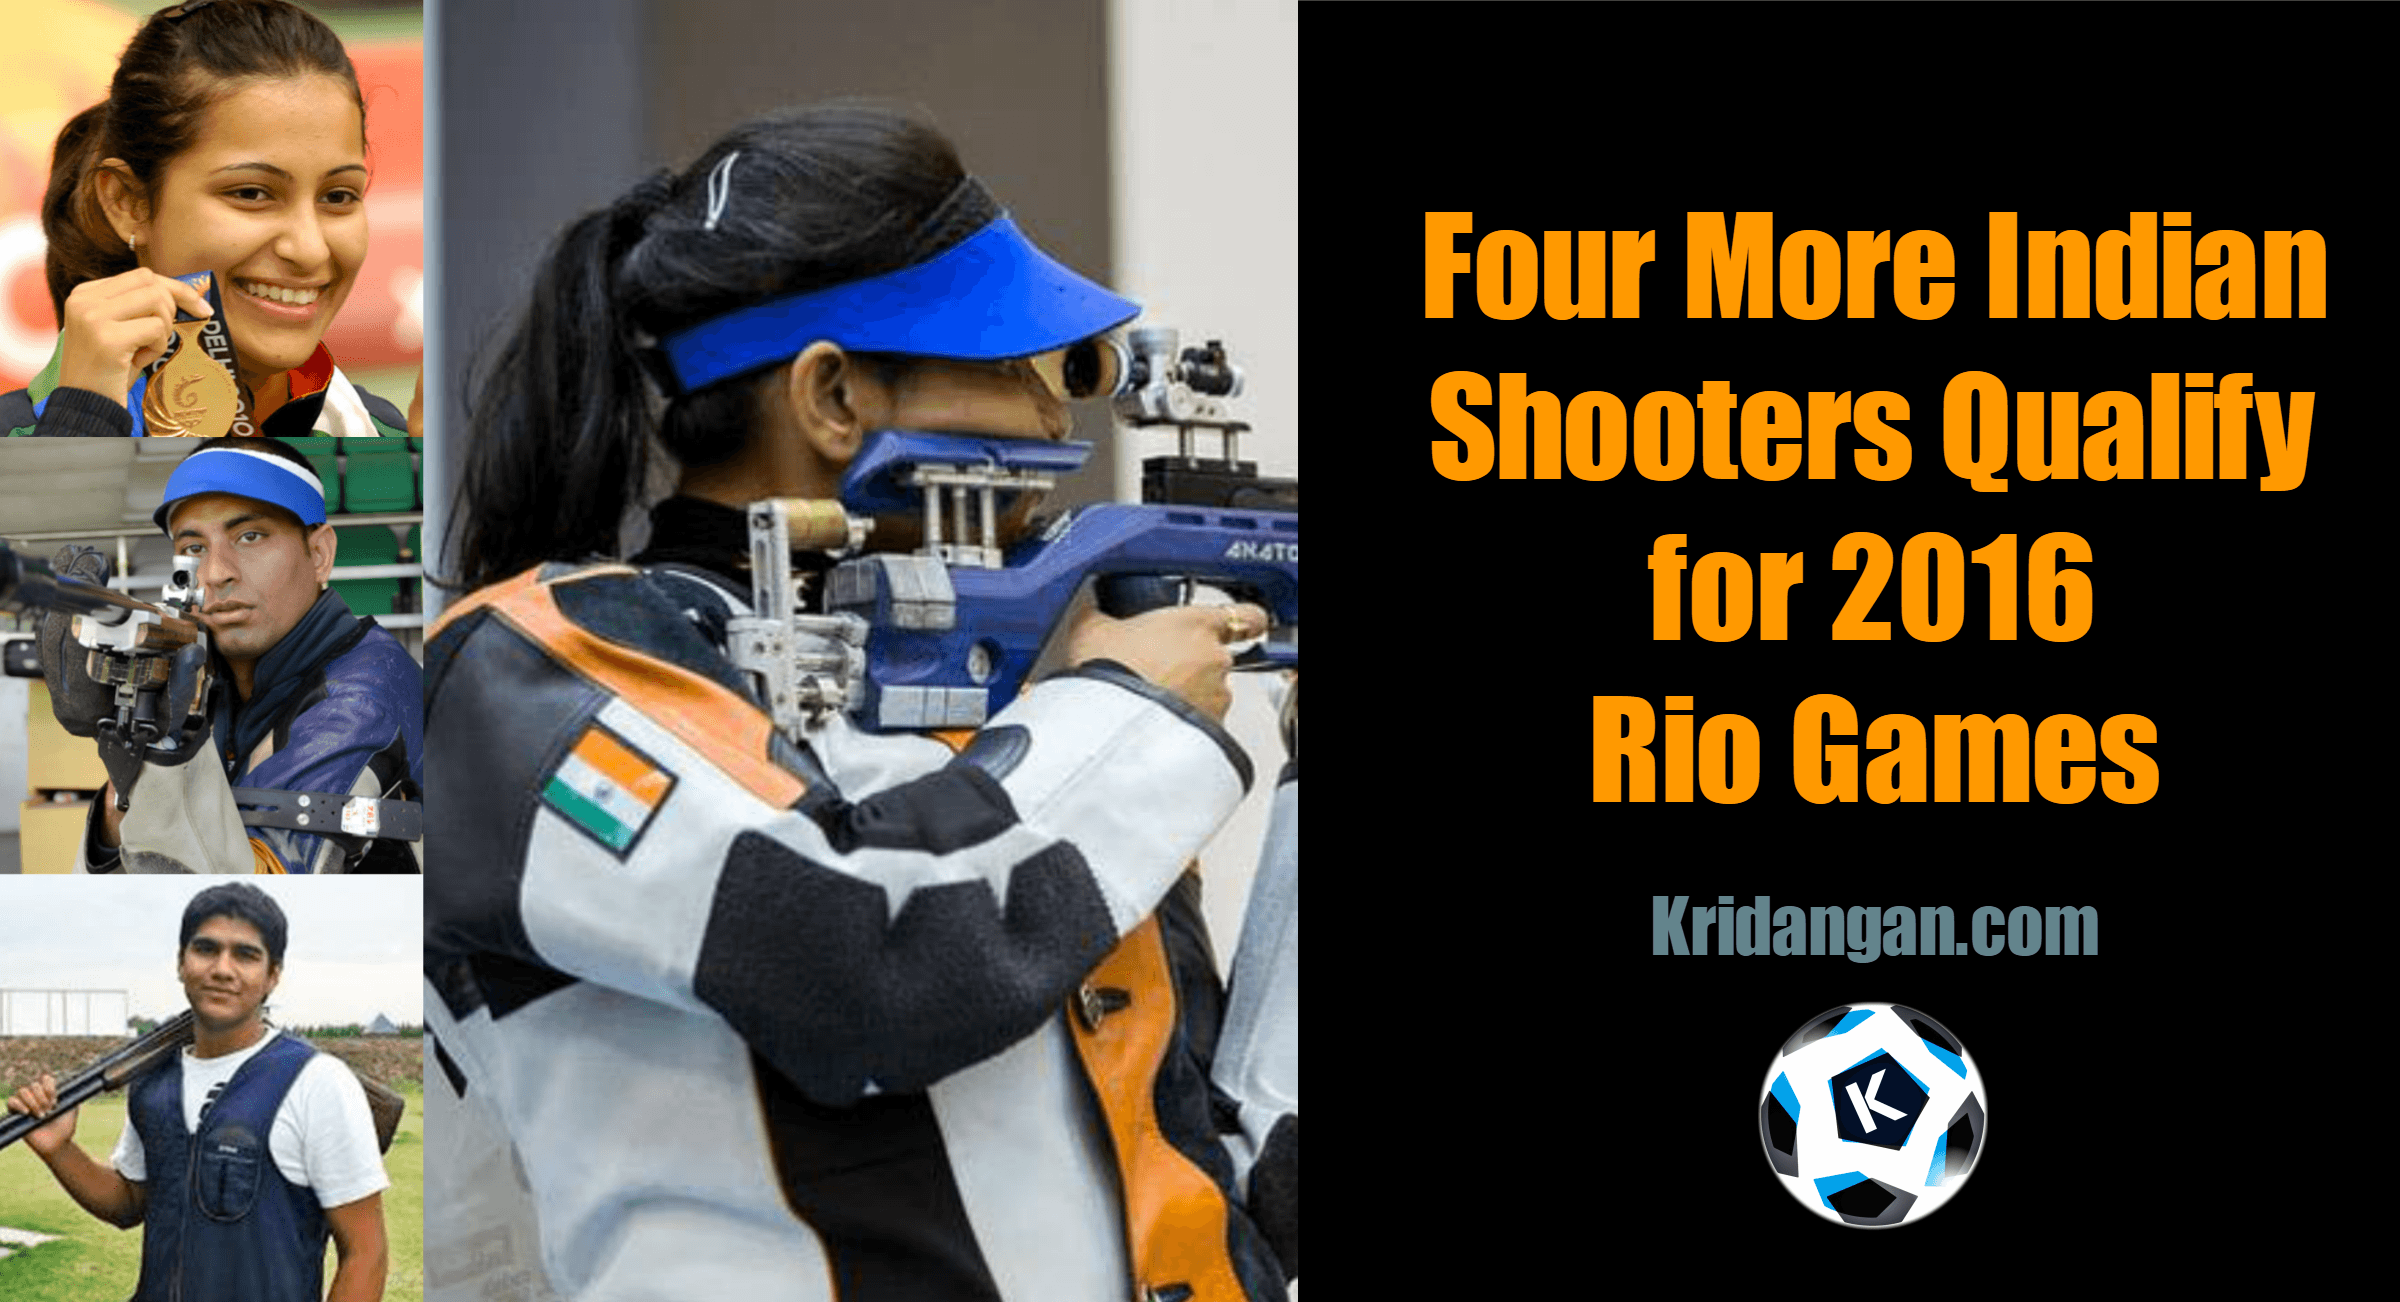 Indian Shooters Qualify